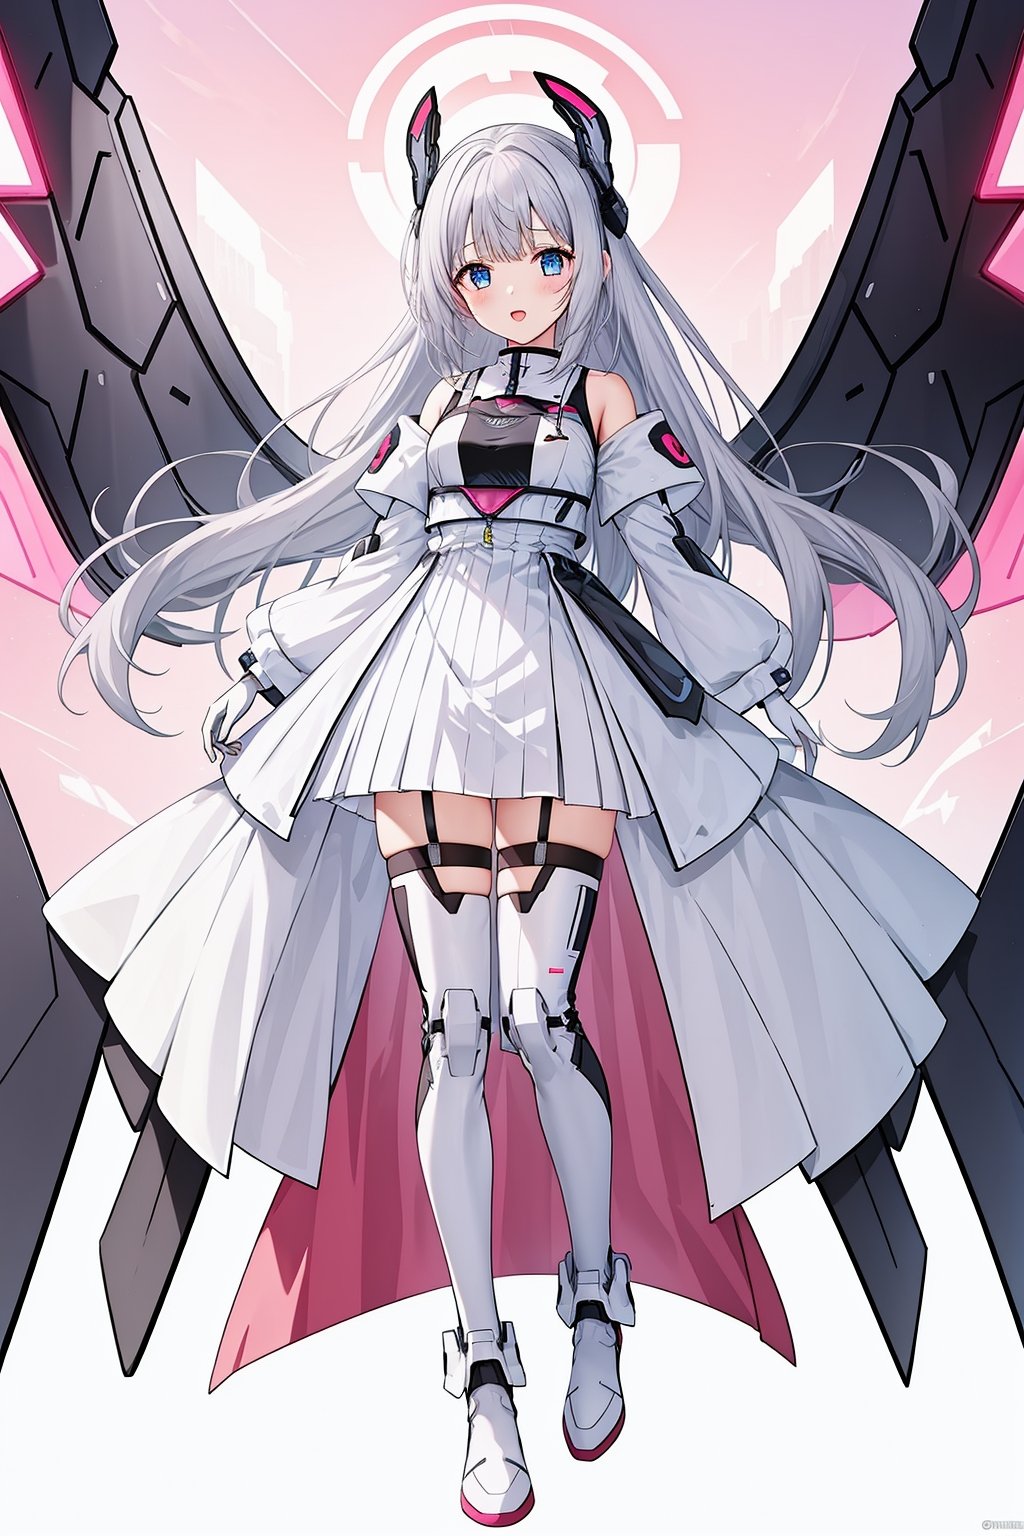 1 girl, solo, pink Mecha pants, wings, blue eyes, long hair, pink shoes, hair accessories, looking at the audience, white hair, hair accessories, bangs, blue eyes, staff, clean background, mechanical wings, (video card fan), gloves, white, simple background, cute, video card promo character, console, keyboard, mouse, joypad, red clothes, festive, Pink theme,<lora:天启姬:0.7>,